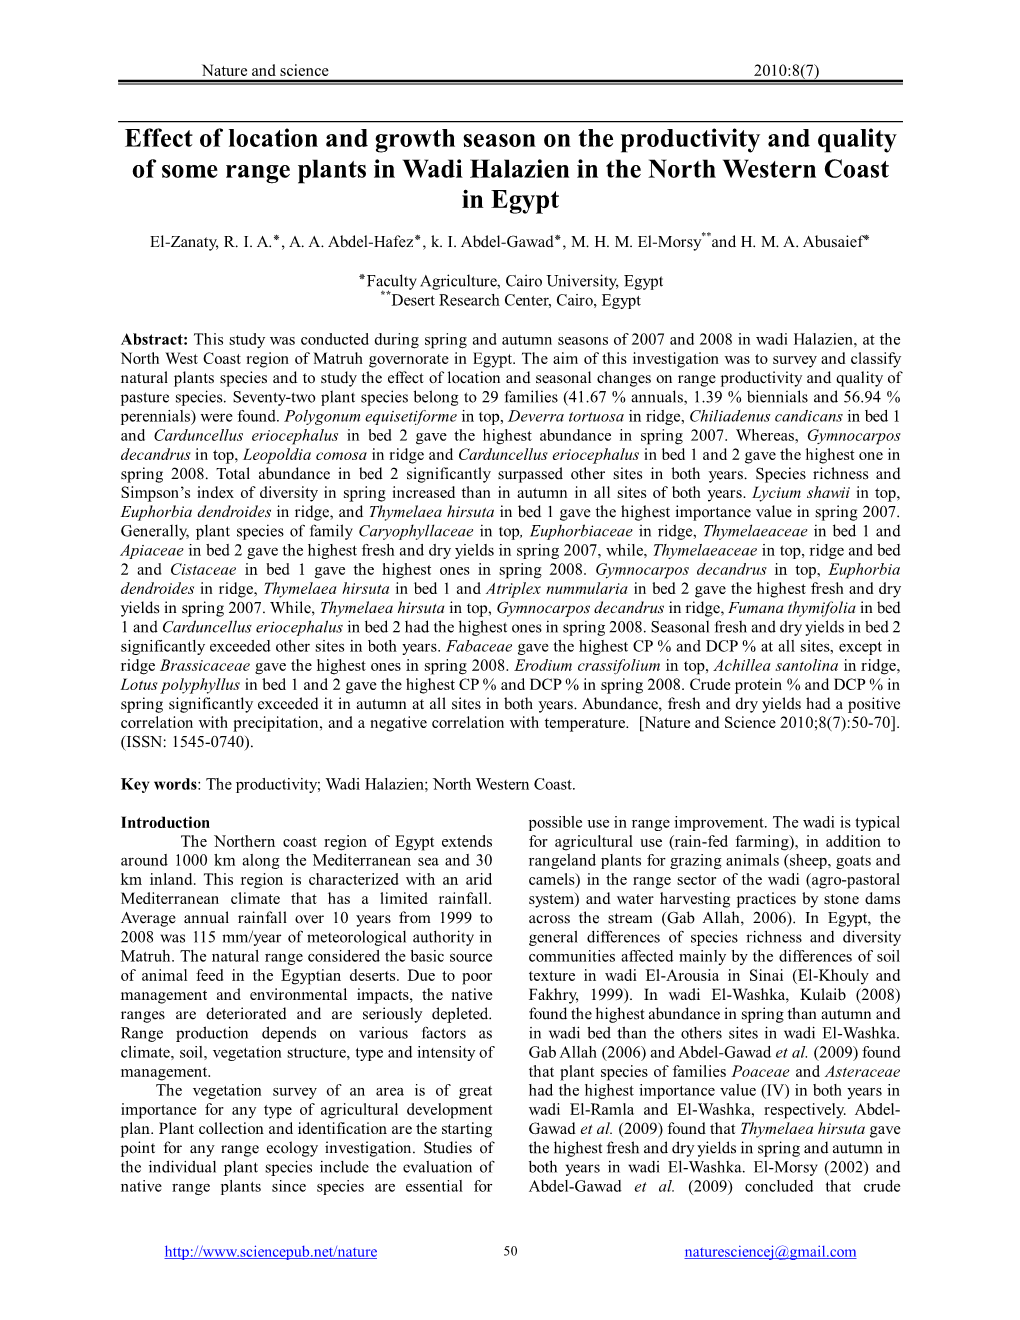 Effect of Location and Growth Season on the Productivity and Quality of Some Range Plants in Wadi Halazien in the North Western Coast in Egypt